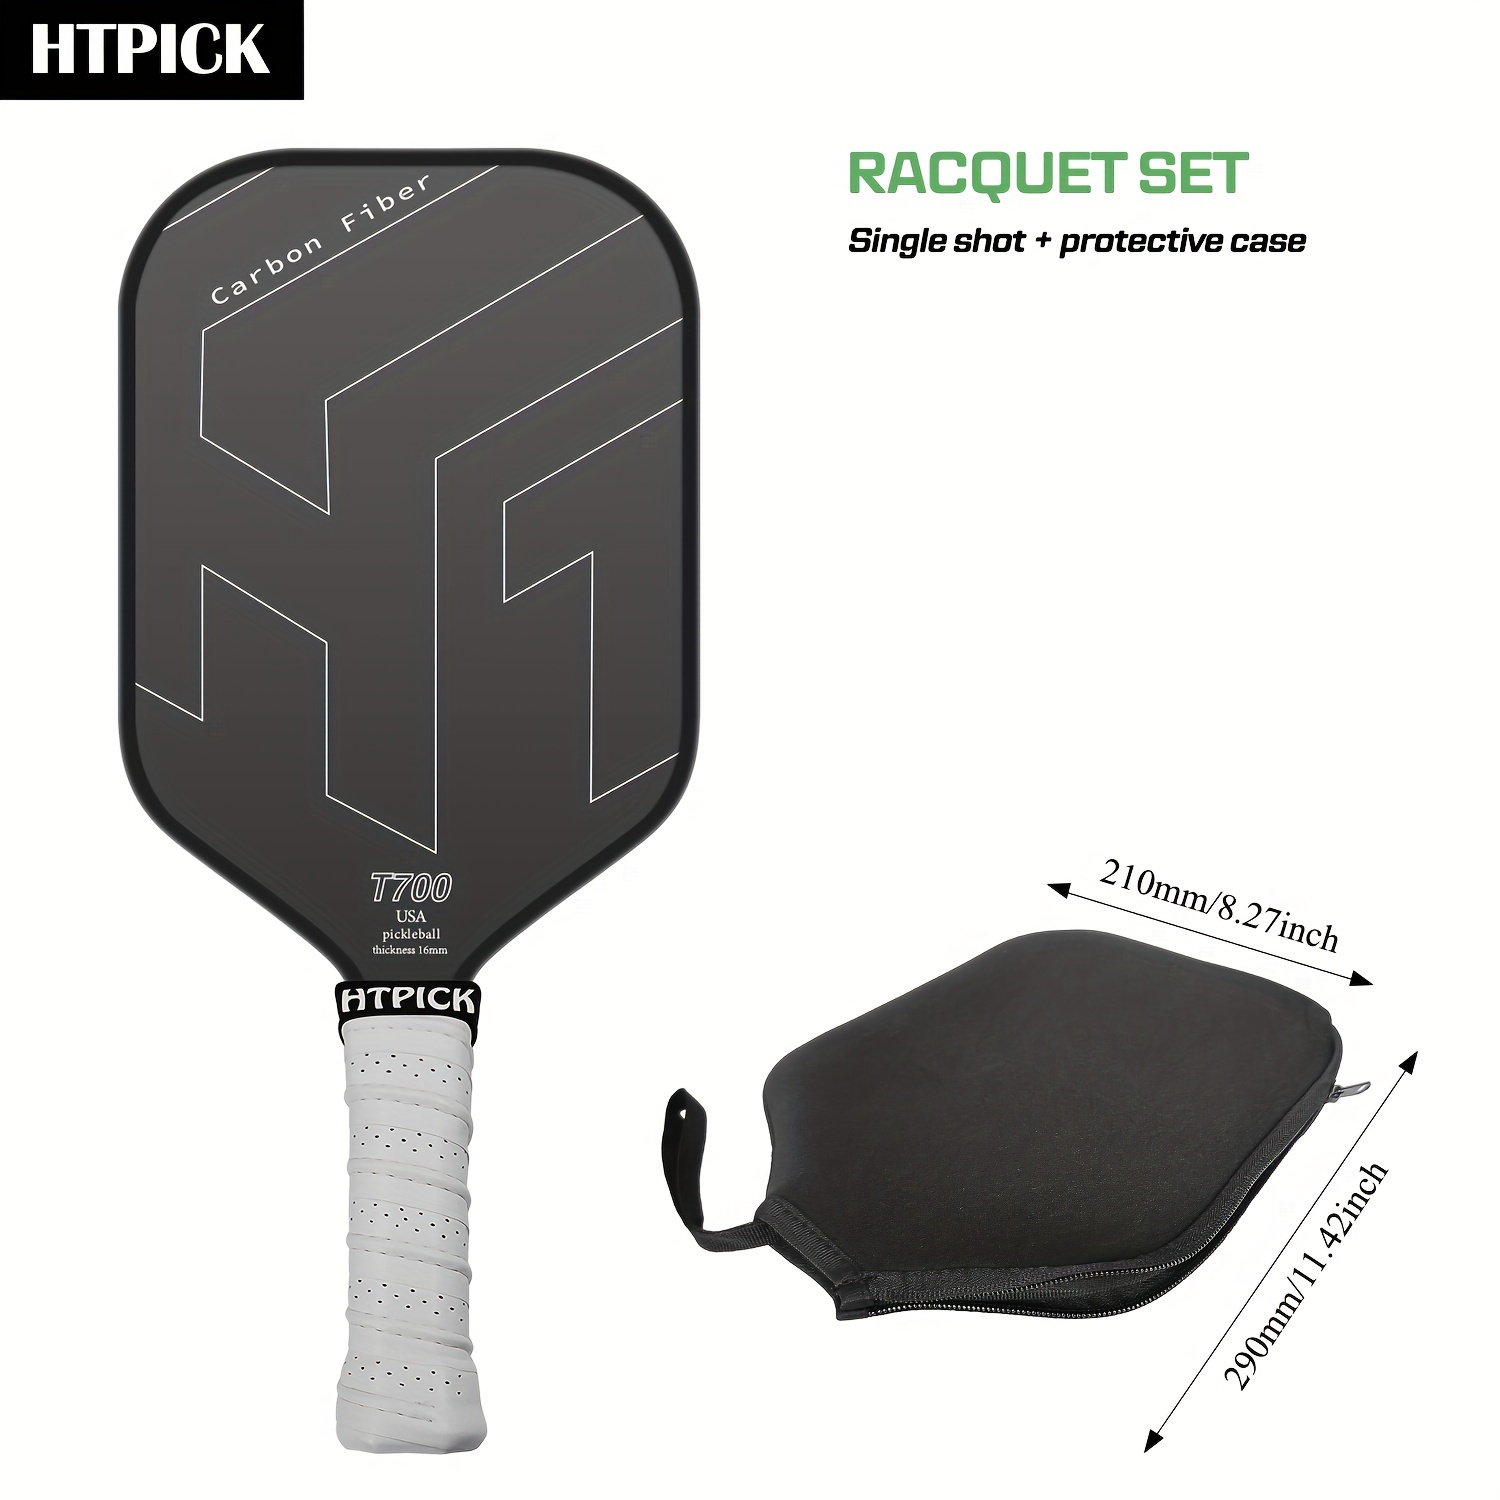 

Pickleball Racket, 16mm T700 Original Carbon Fiber Pickleball Racket, With Excellent Gravel And Rotation Ability, Power And Control Functions